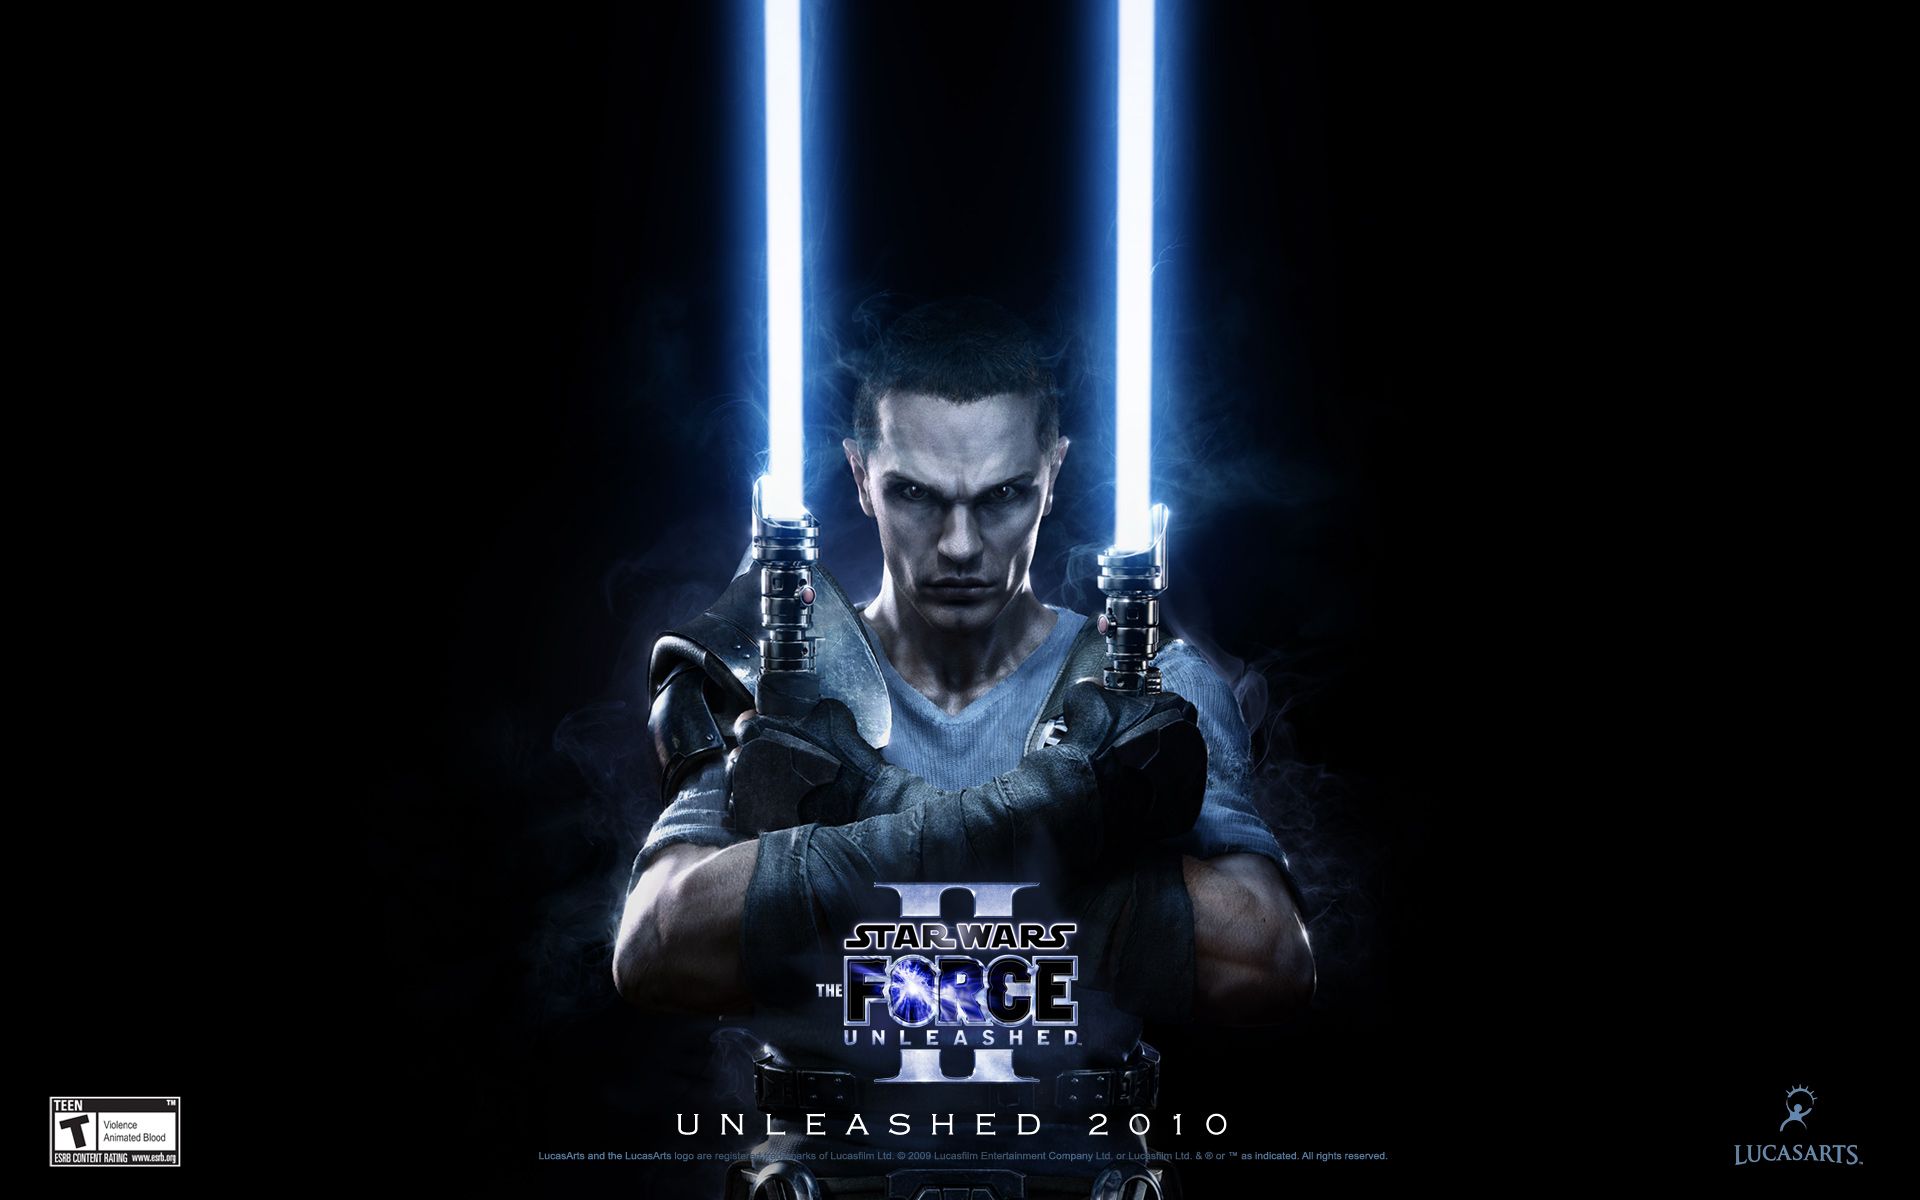 star wars the force unleashed 2 pc game free download